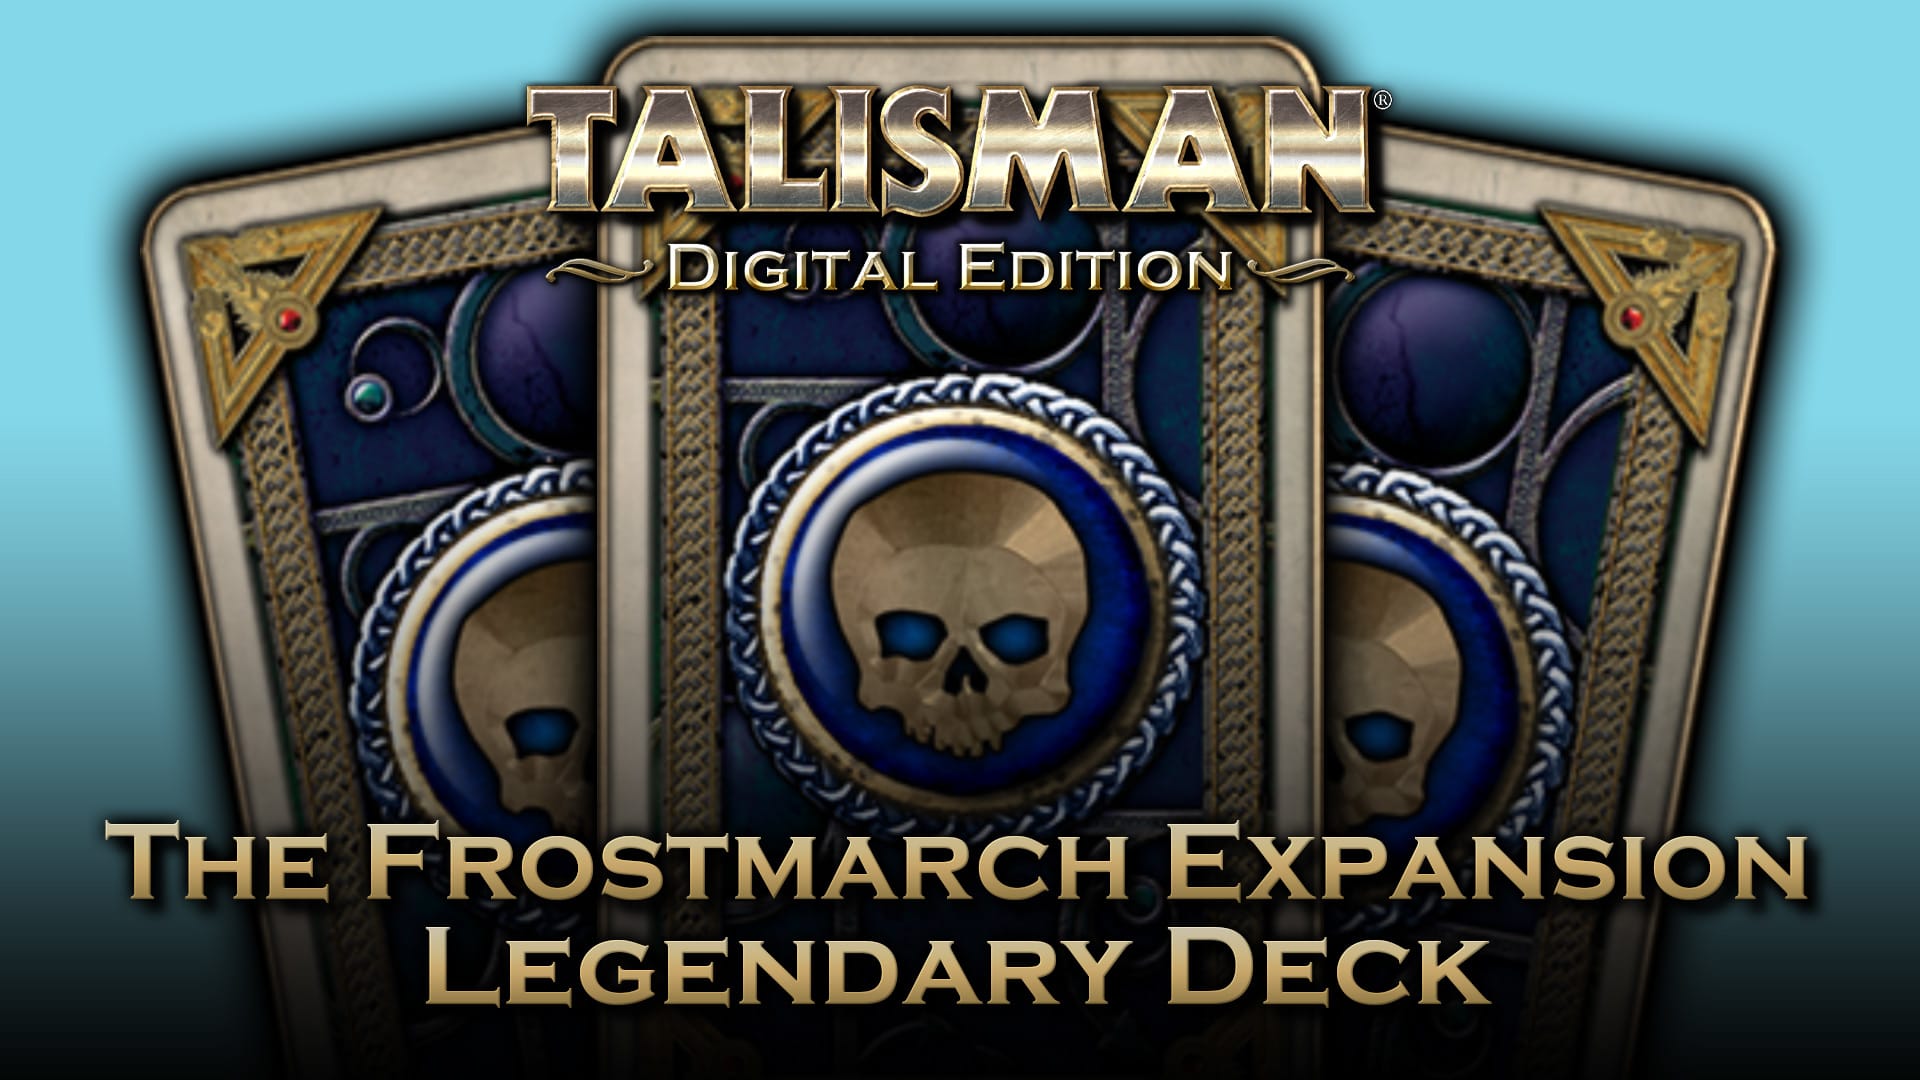 The Frostmarch Expansion: Legendary Deck